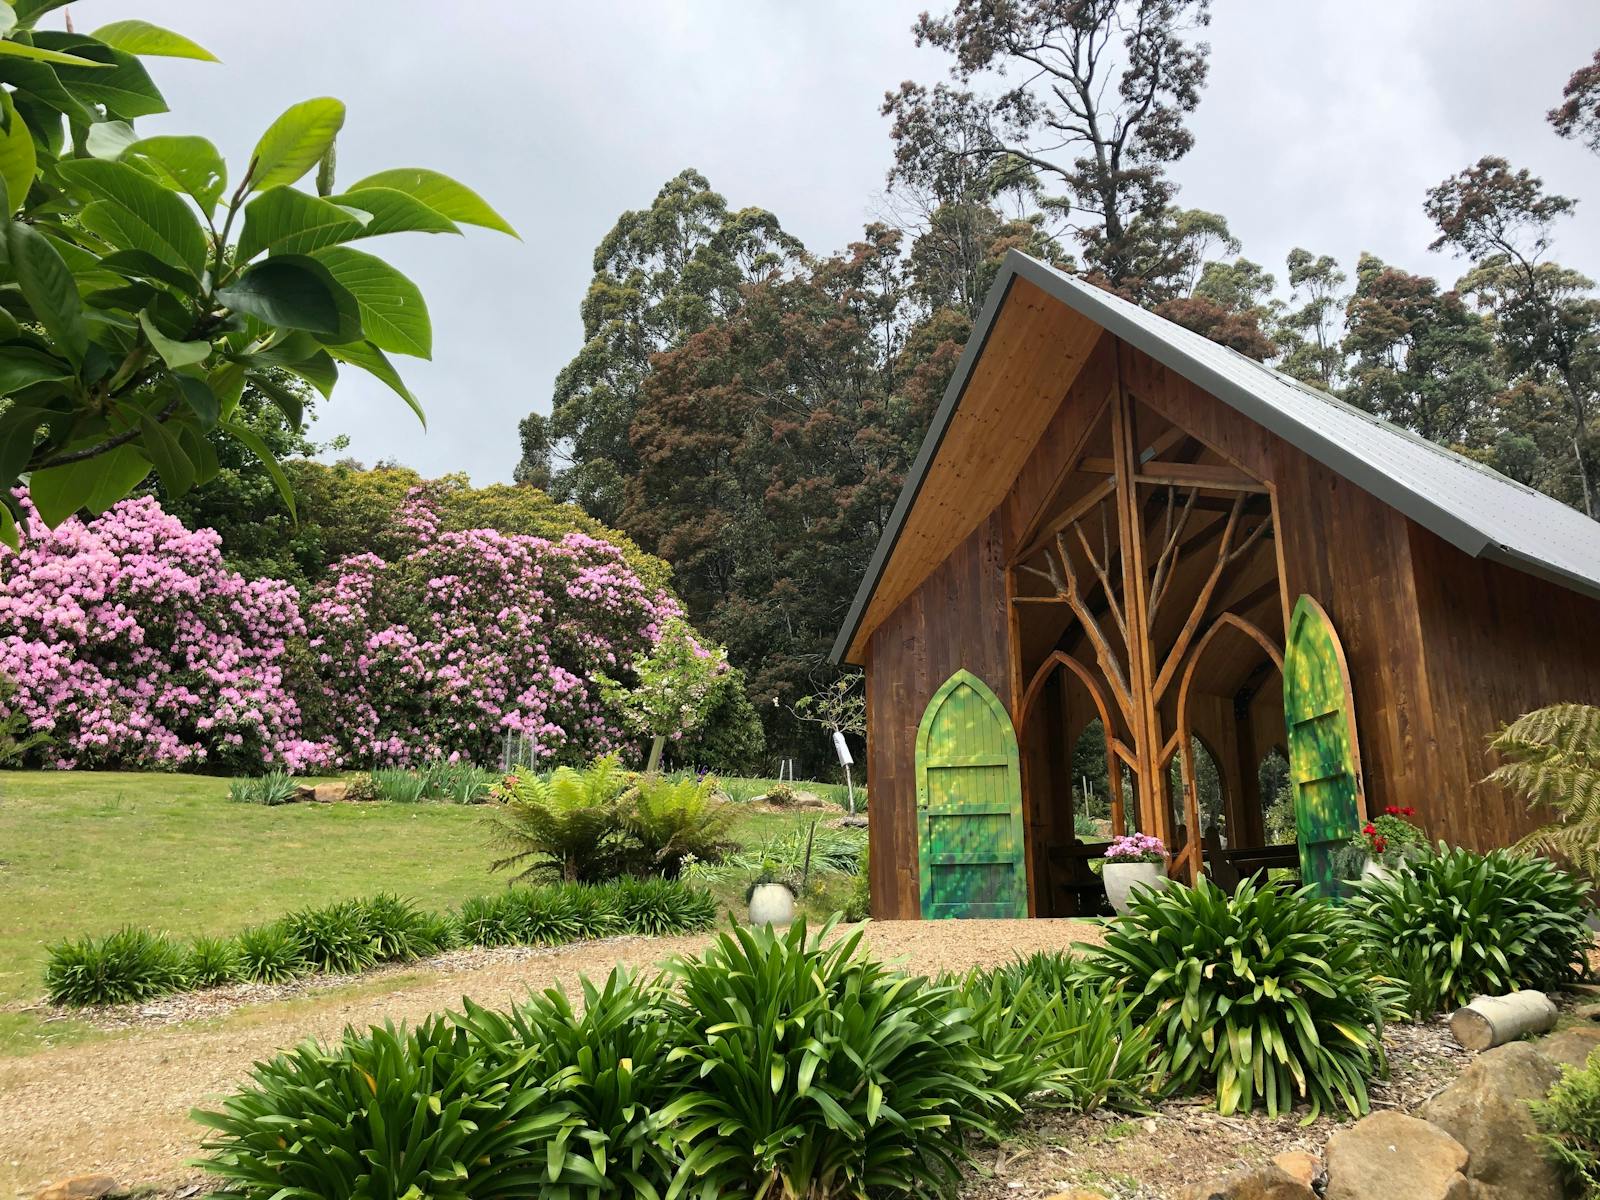 Chapel is open air, a place for prayer and contemplation of the natural beauty. Available for events